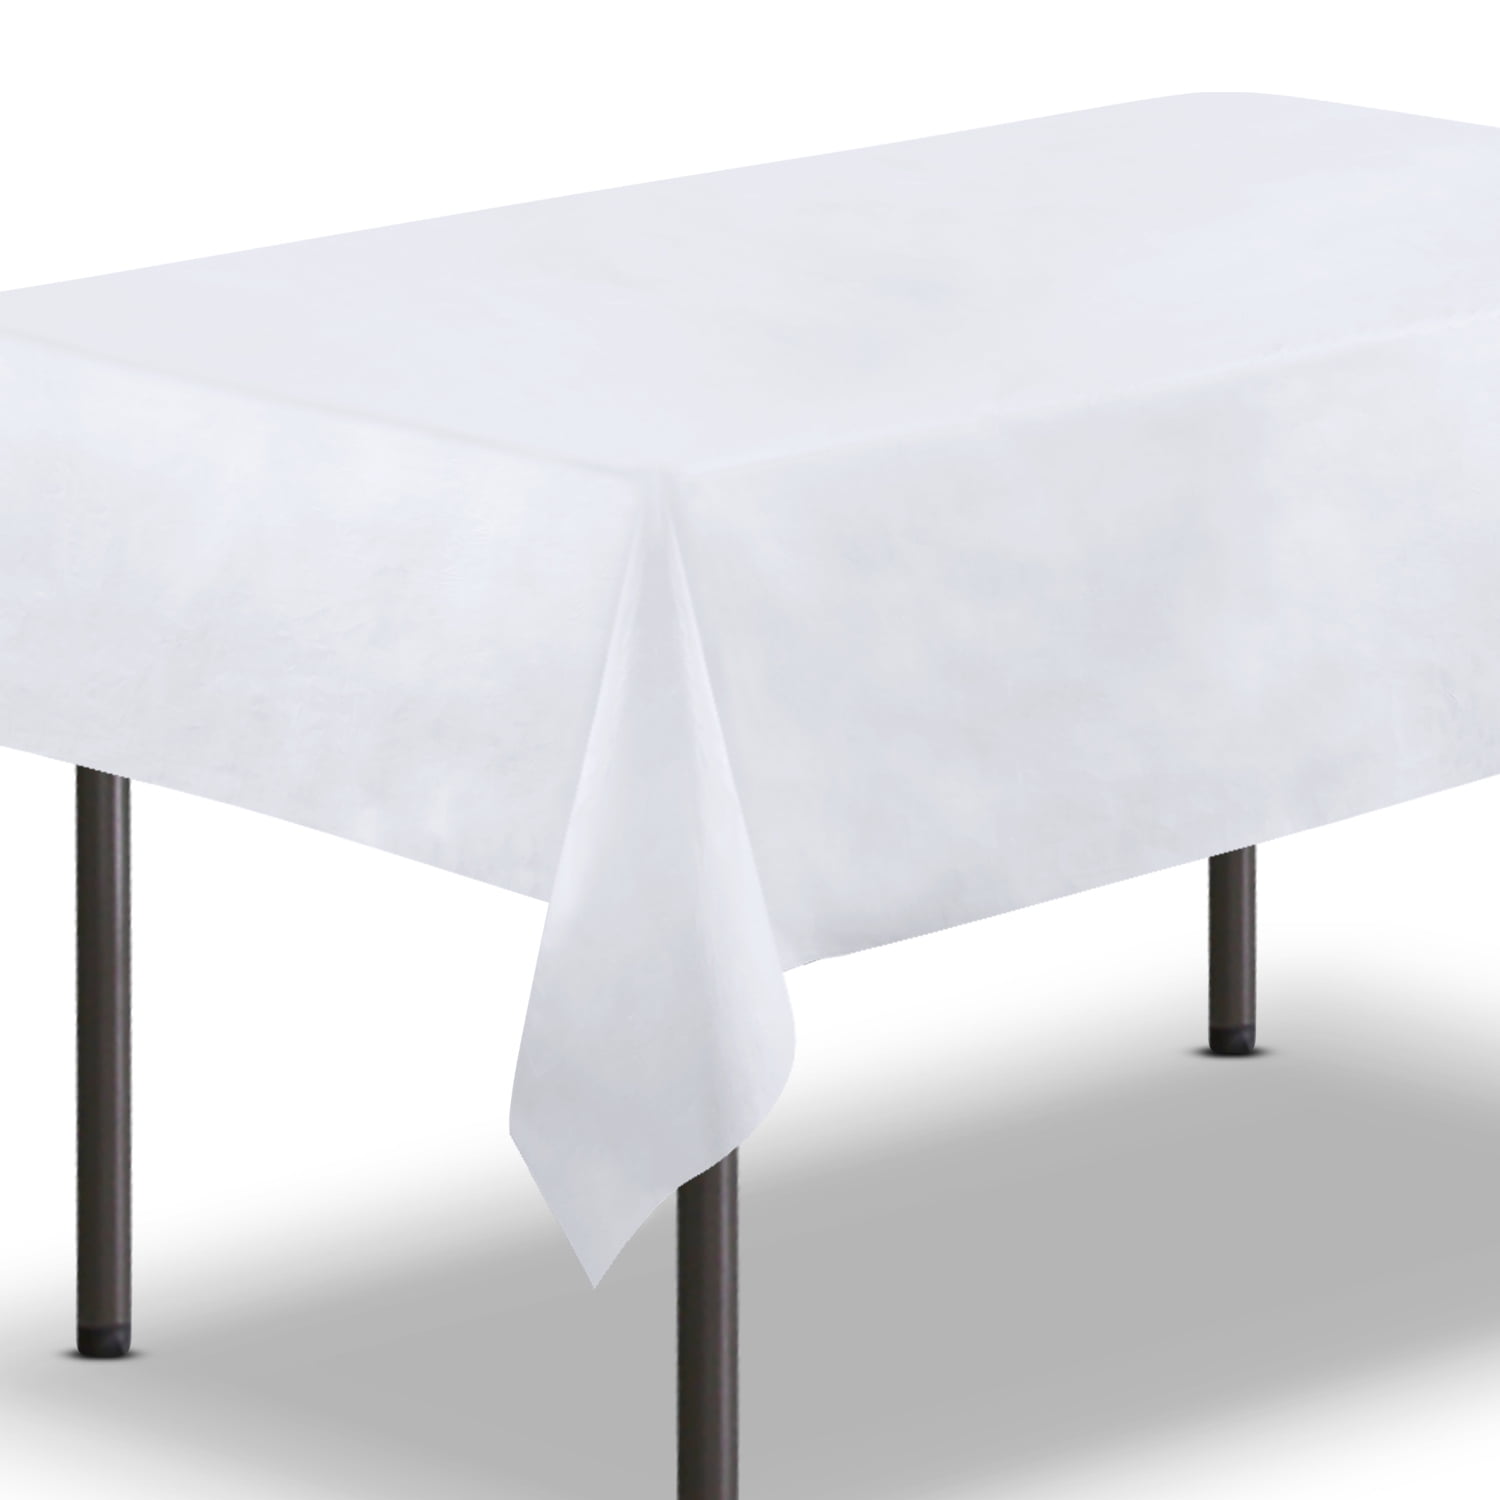 Disposable Plastic Tablecloths 54" x 108" Rectangle Pack of 4 Package May Vary